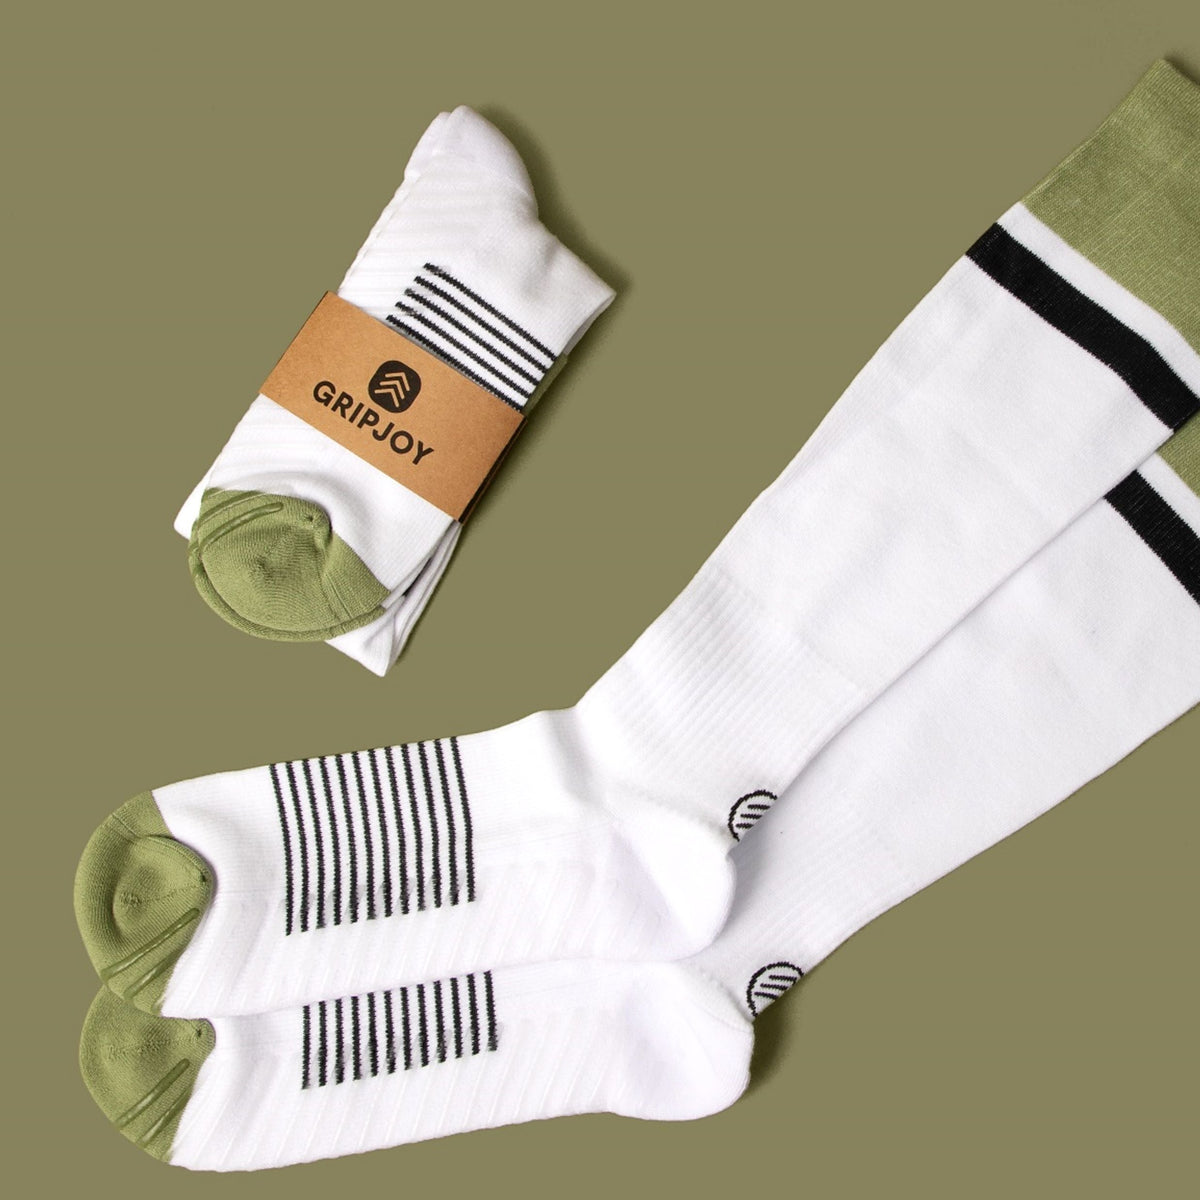 Men's White/Black/Green Compression Socks with Grips - 2 Pairs